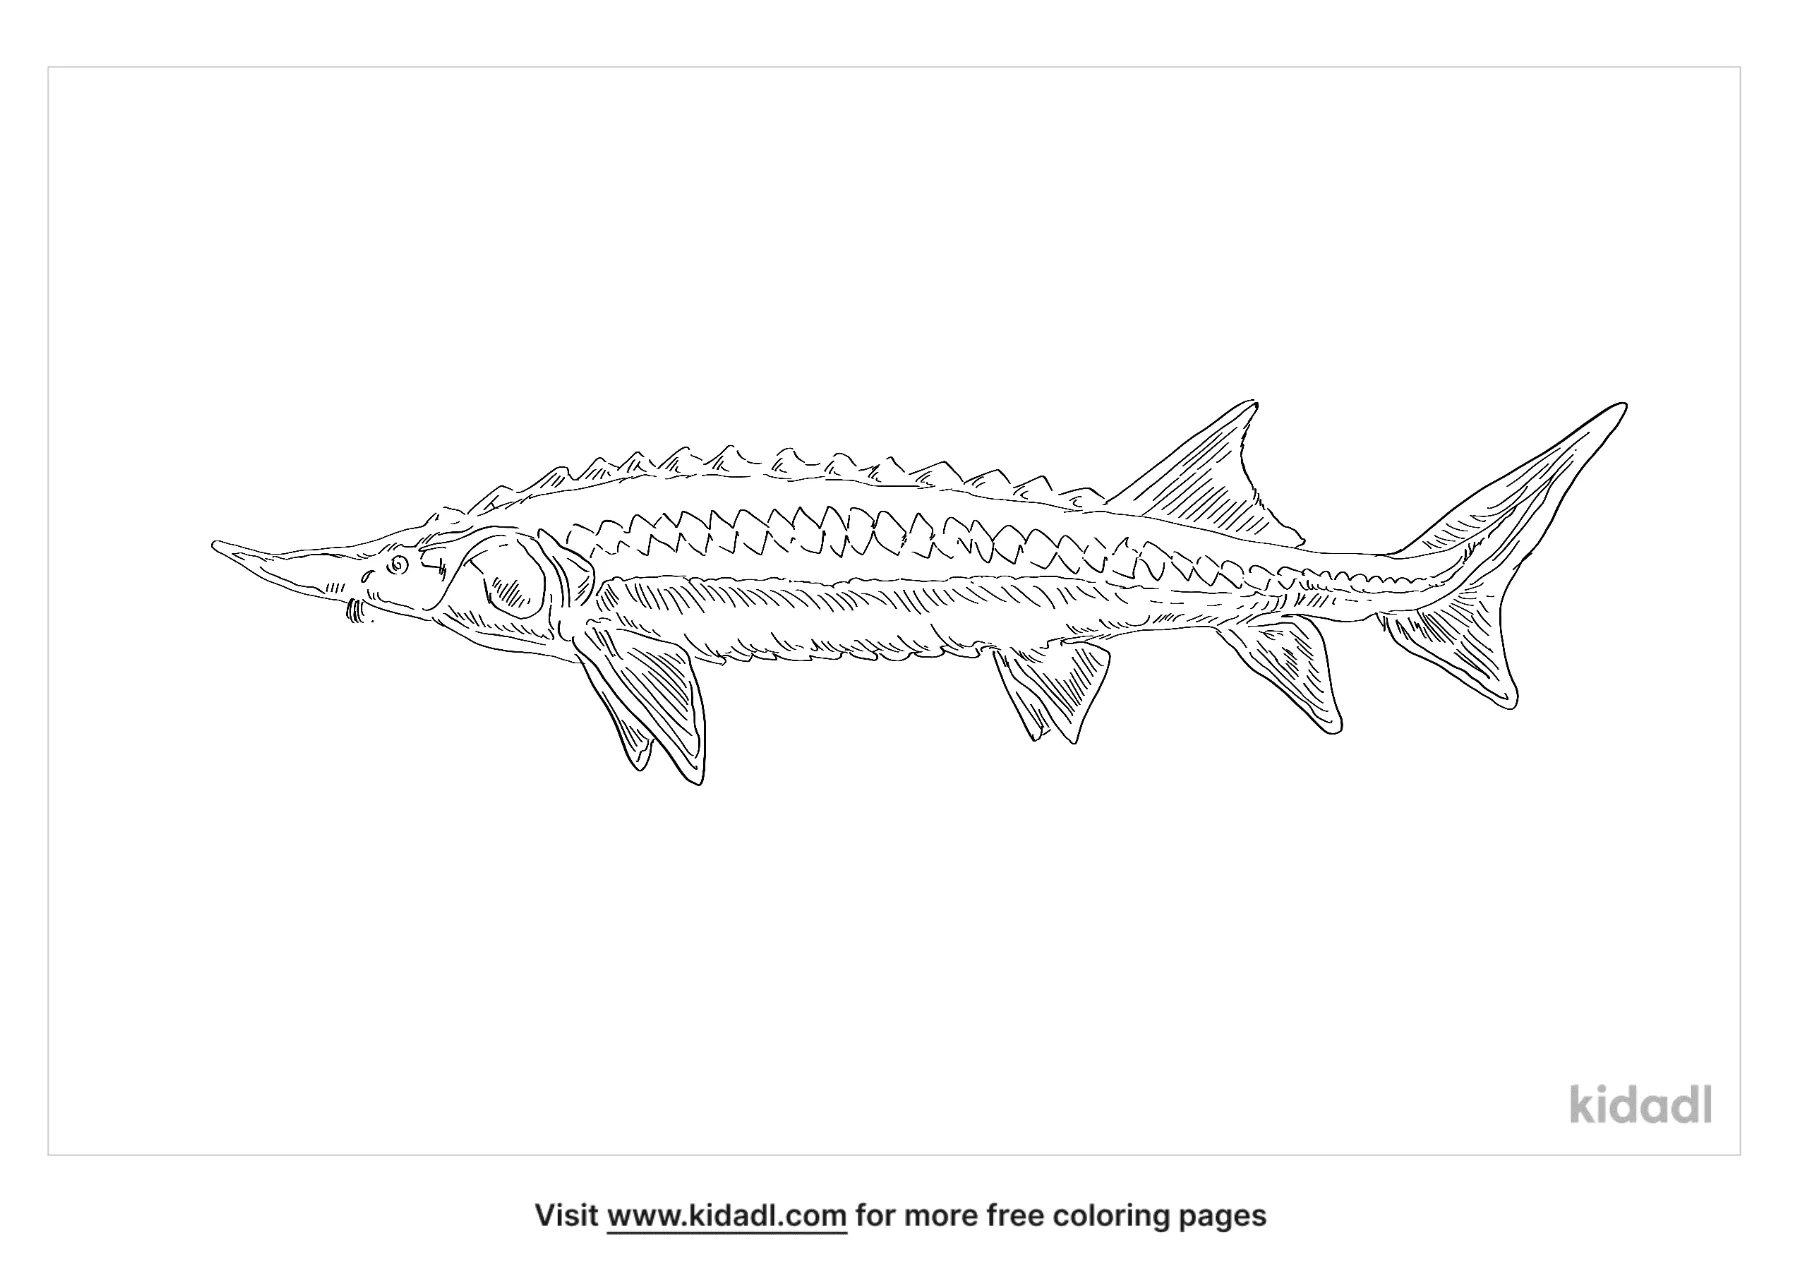 Starry Sturgeon Coloring Page